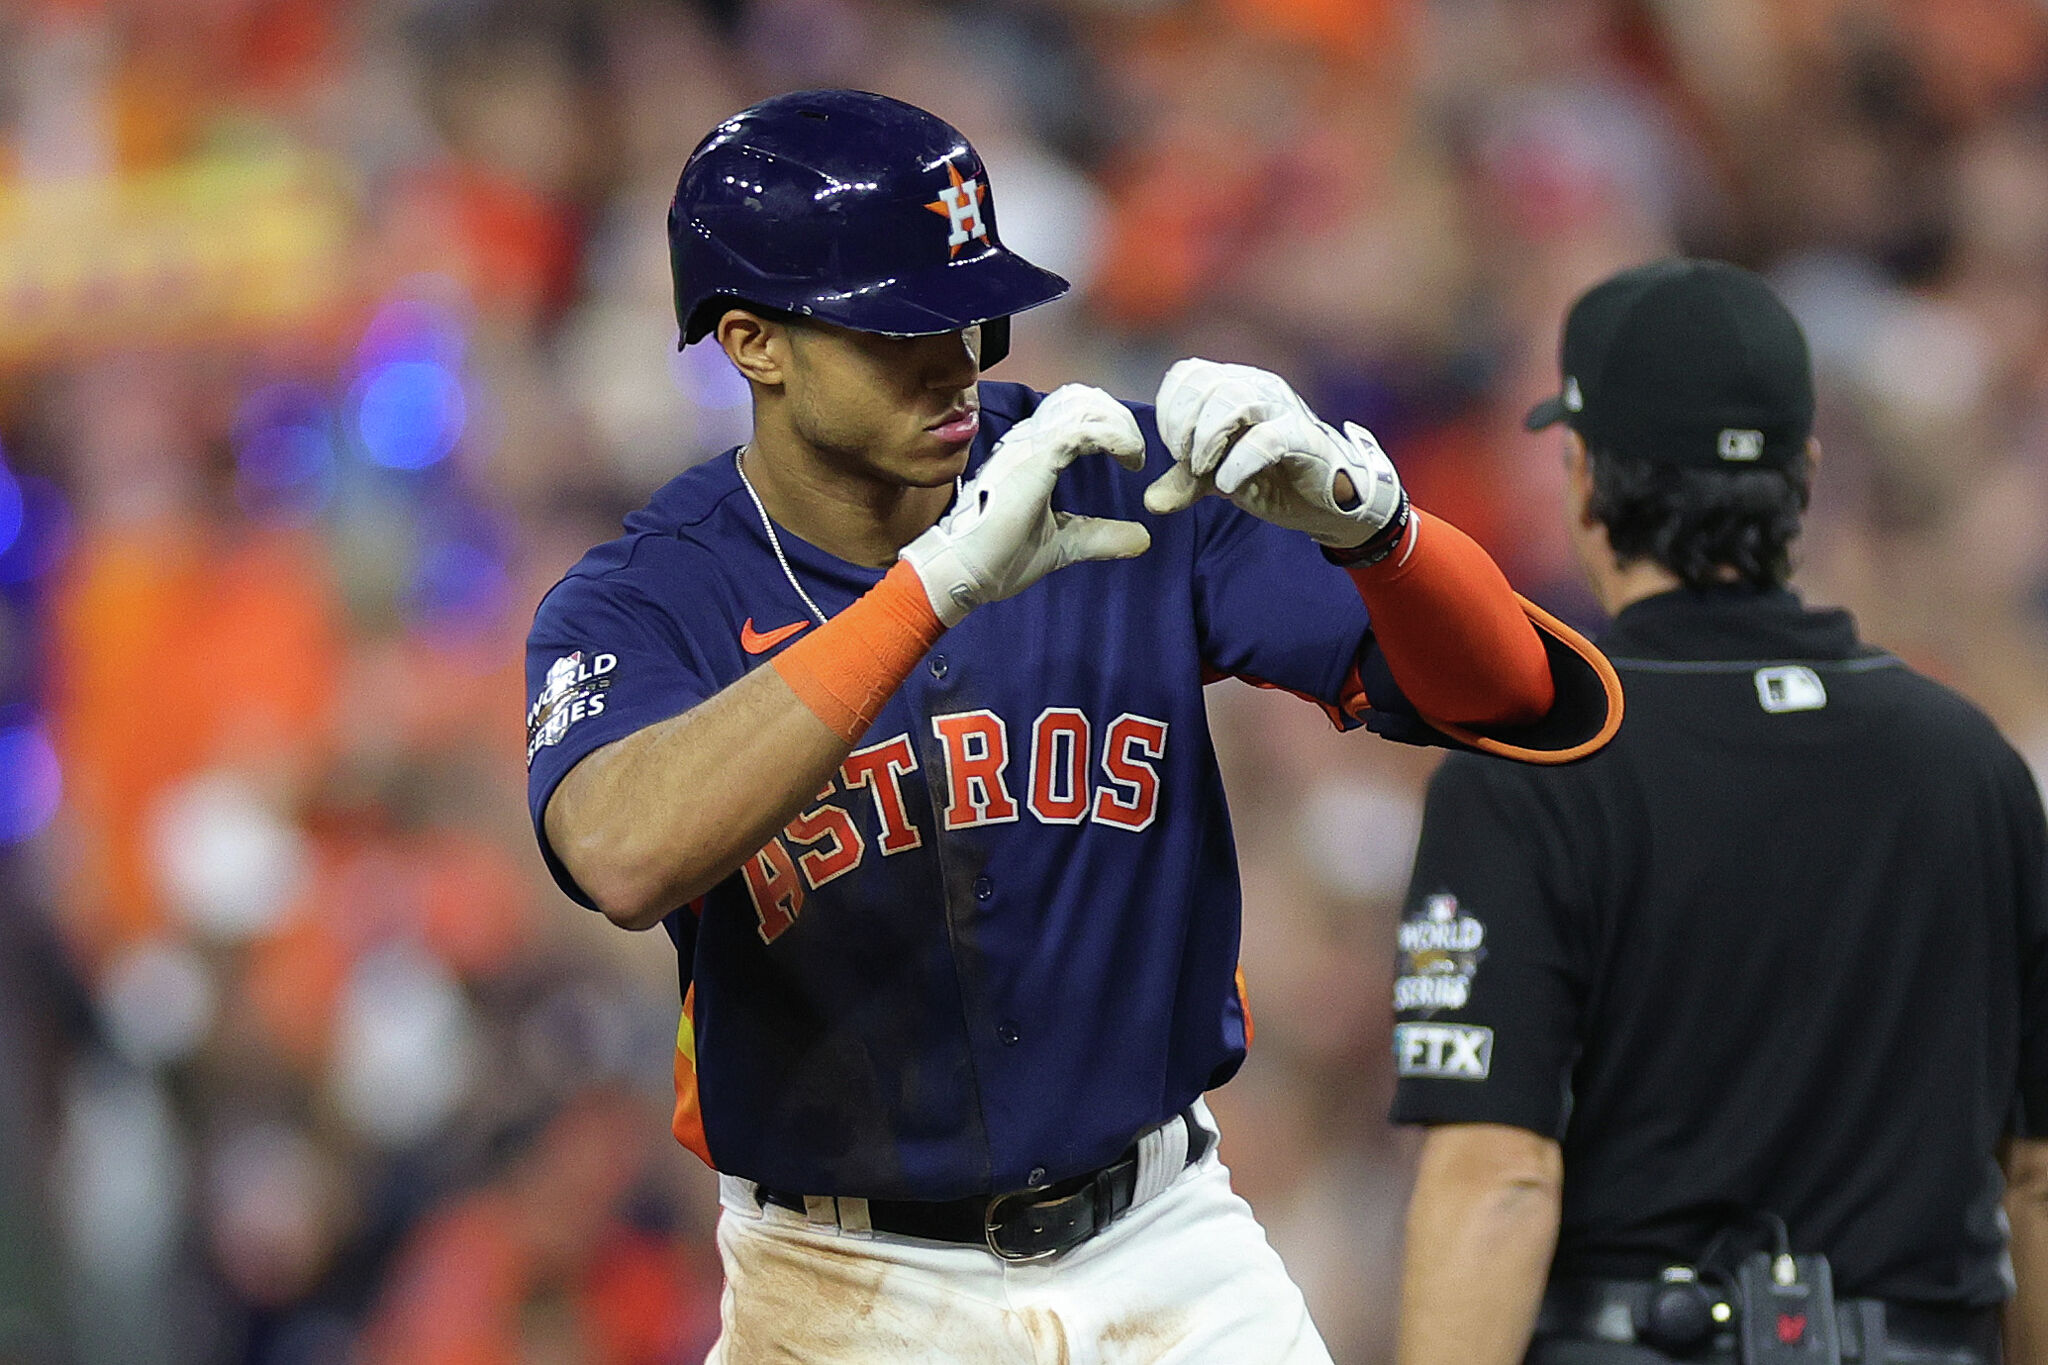 Astros Jeremy Peña Does This Gesture After Home Runs & The Reason